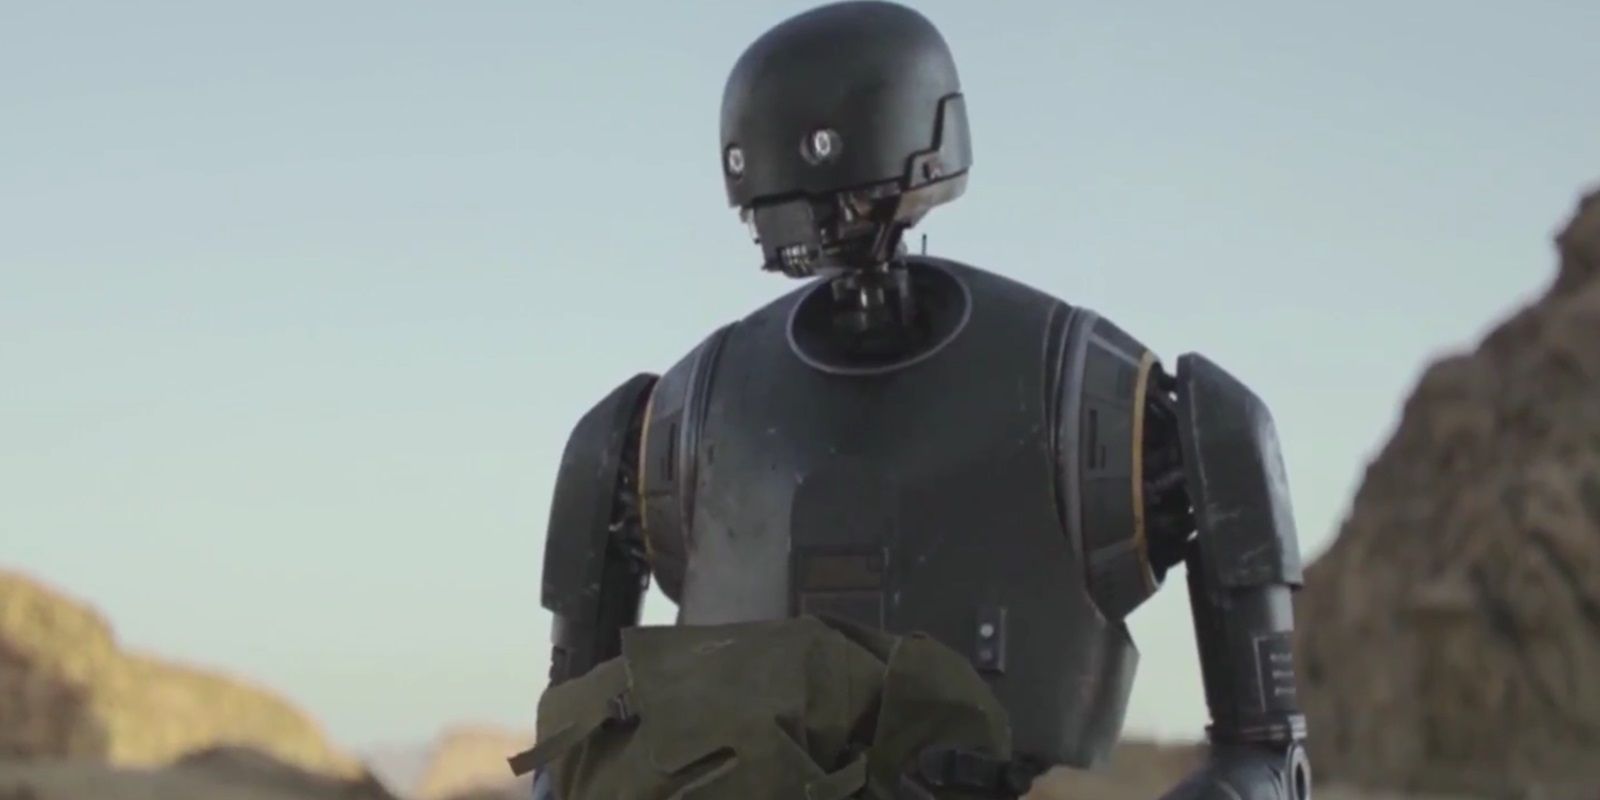 K-2SO stays behind at the ship on Jedha in Rogue One A Star Wars Story